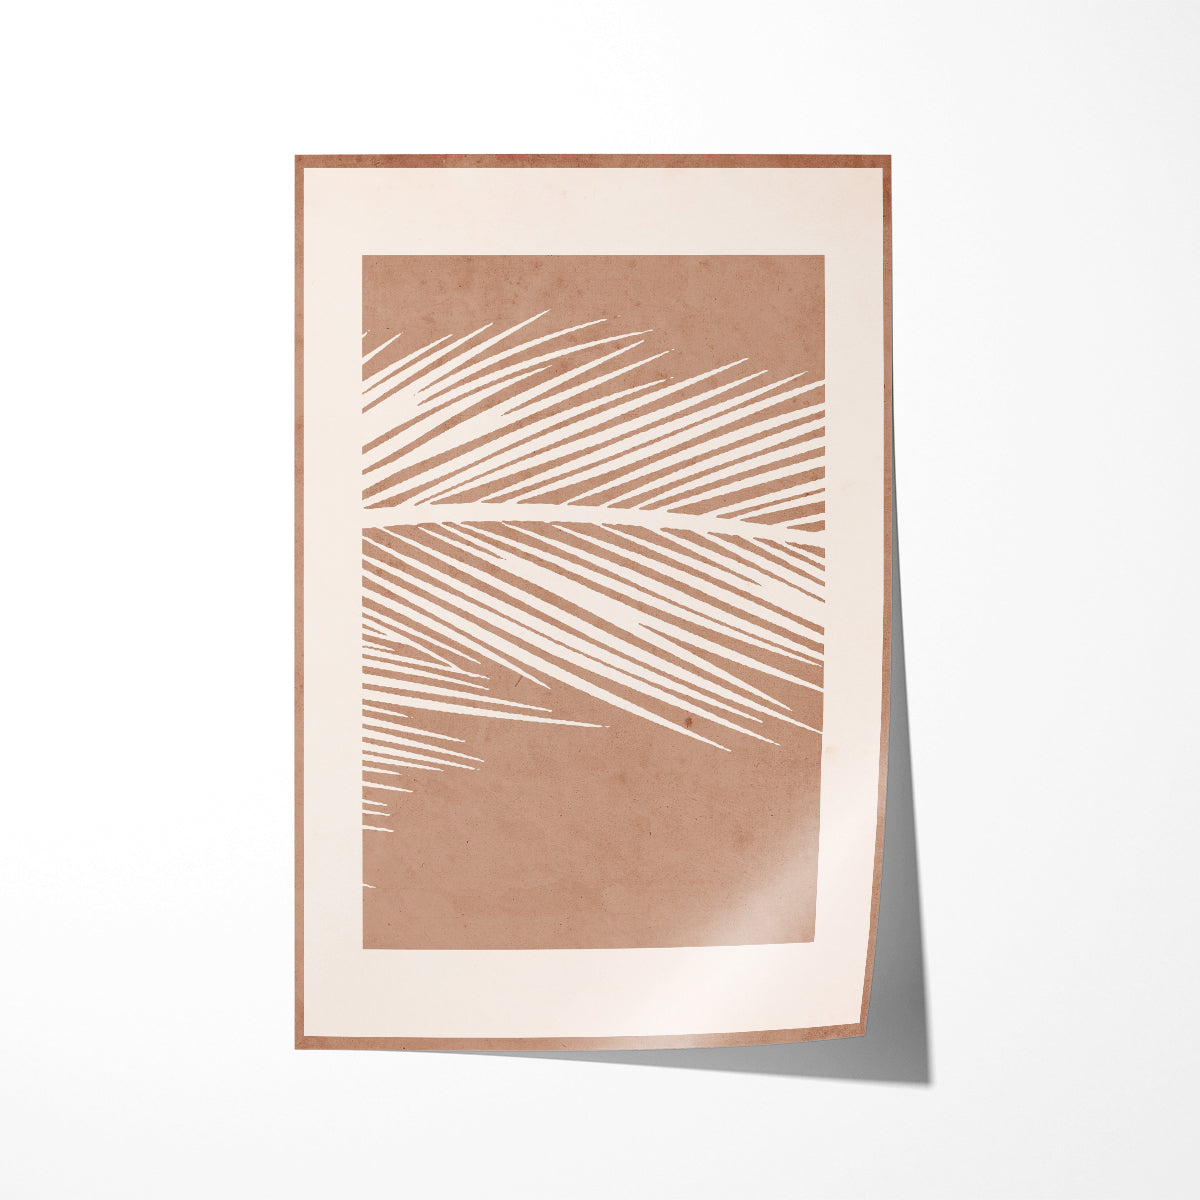 Brown Leaf Abstract Wall Poster Print-Vertical Posters NOT FRAMED-CetArt-8″x10″ inches-CetArt